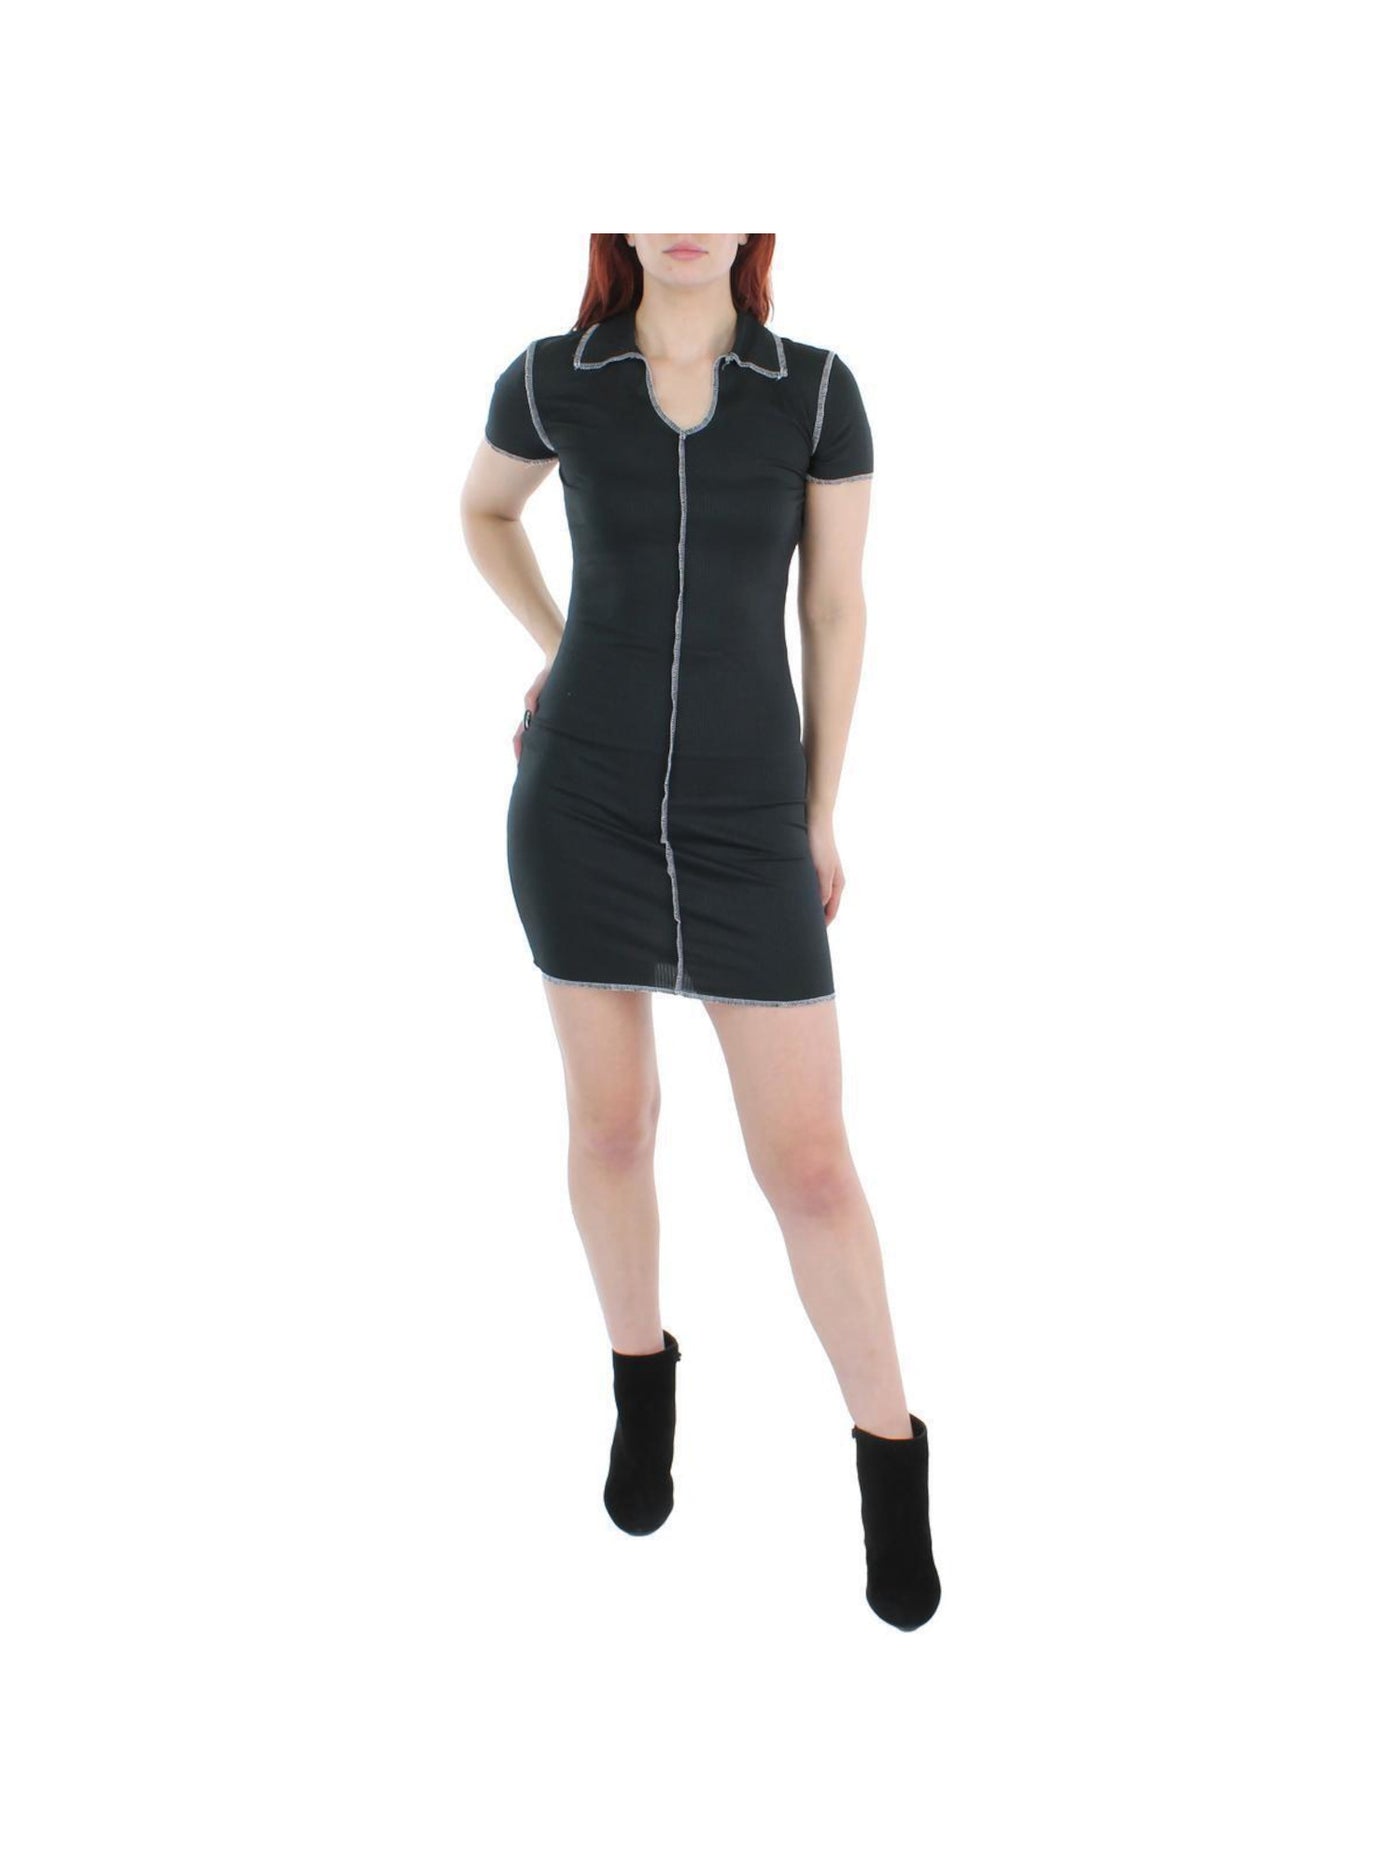 NO COMMENT Womens Black Fitted Ribbed Pullover Contrast Stitching Short Sleeve V Neck Short Shirt Dress Juniors M